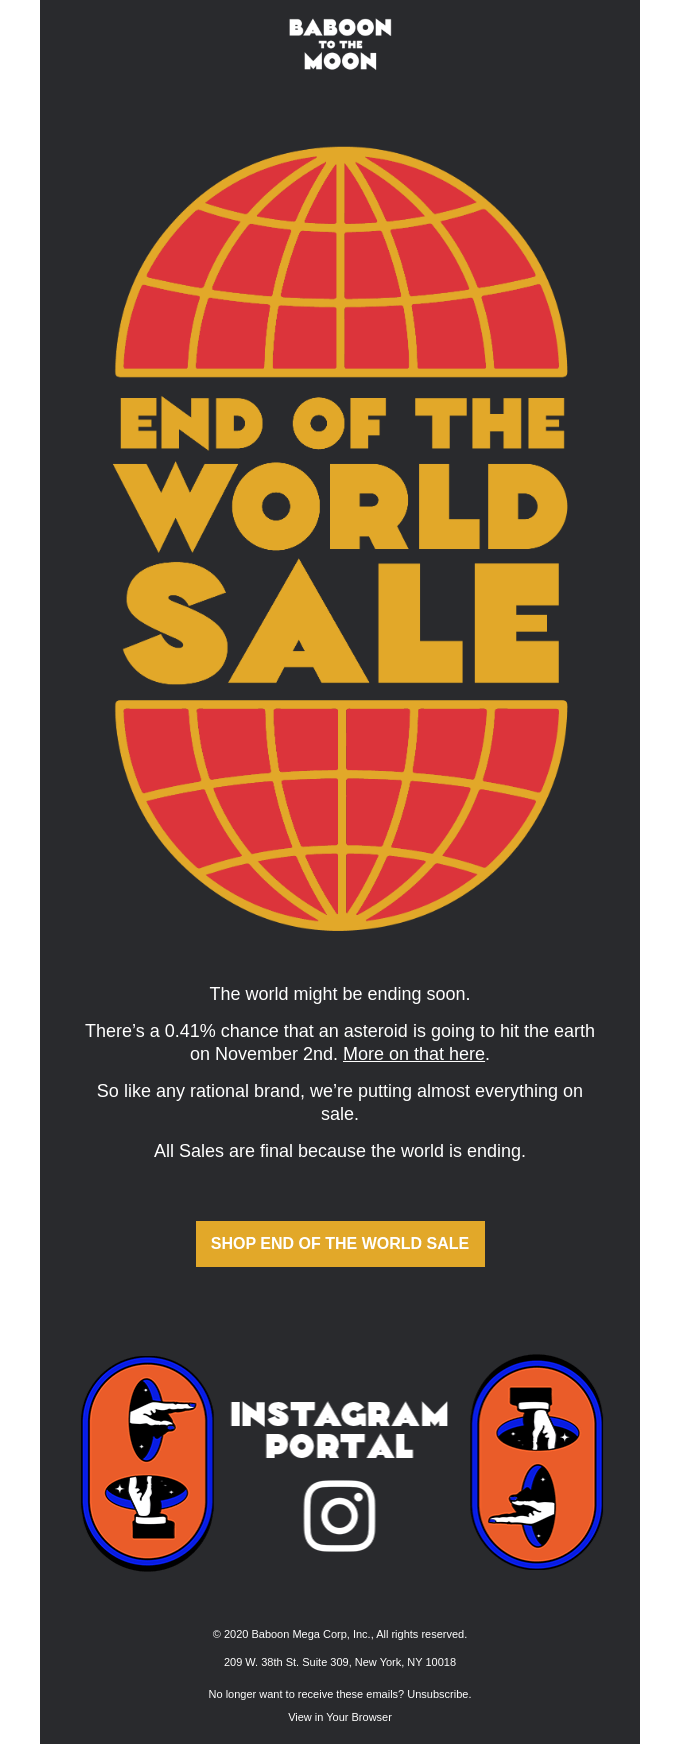 End of the World Sale by Baboon